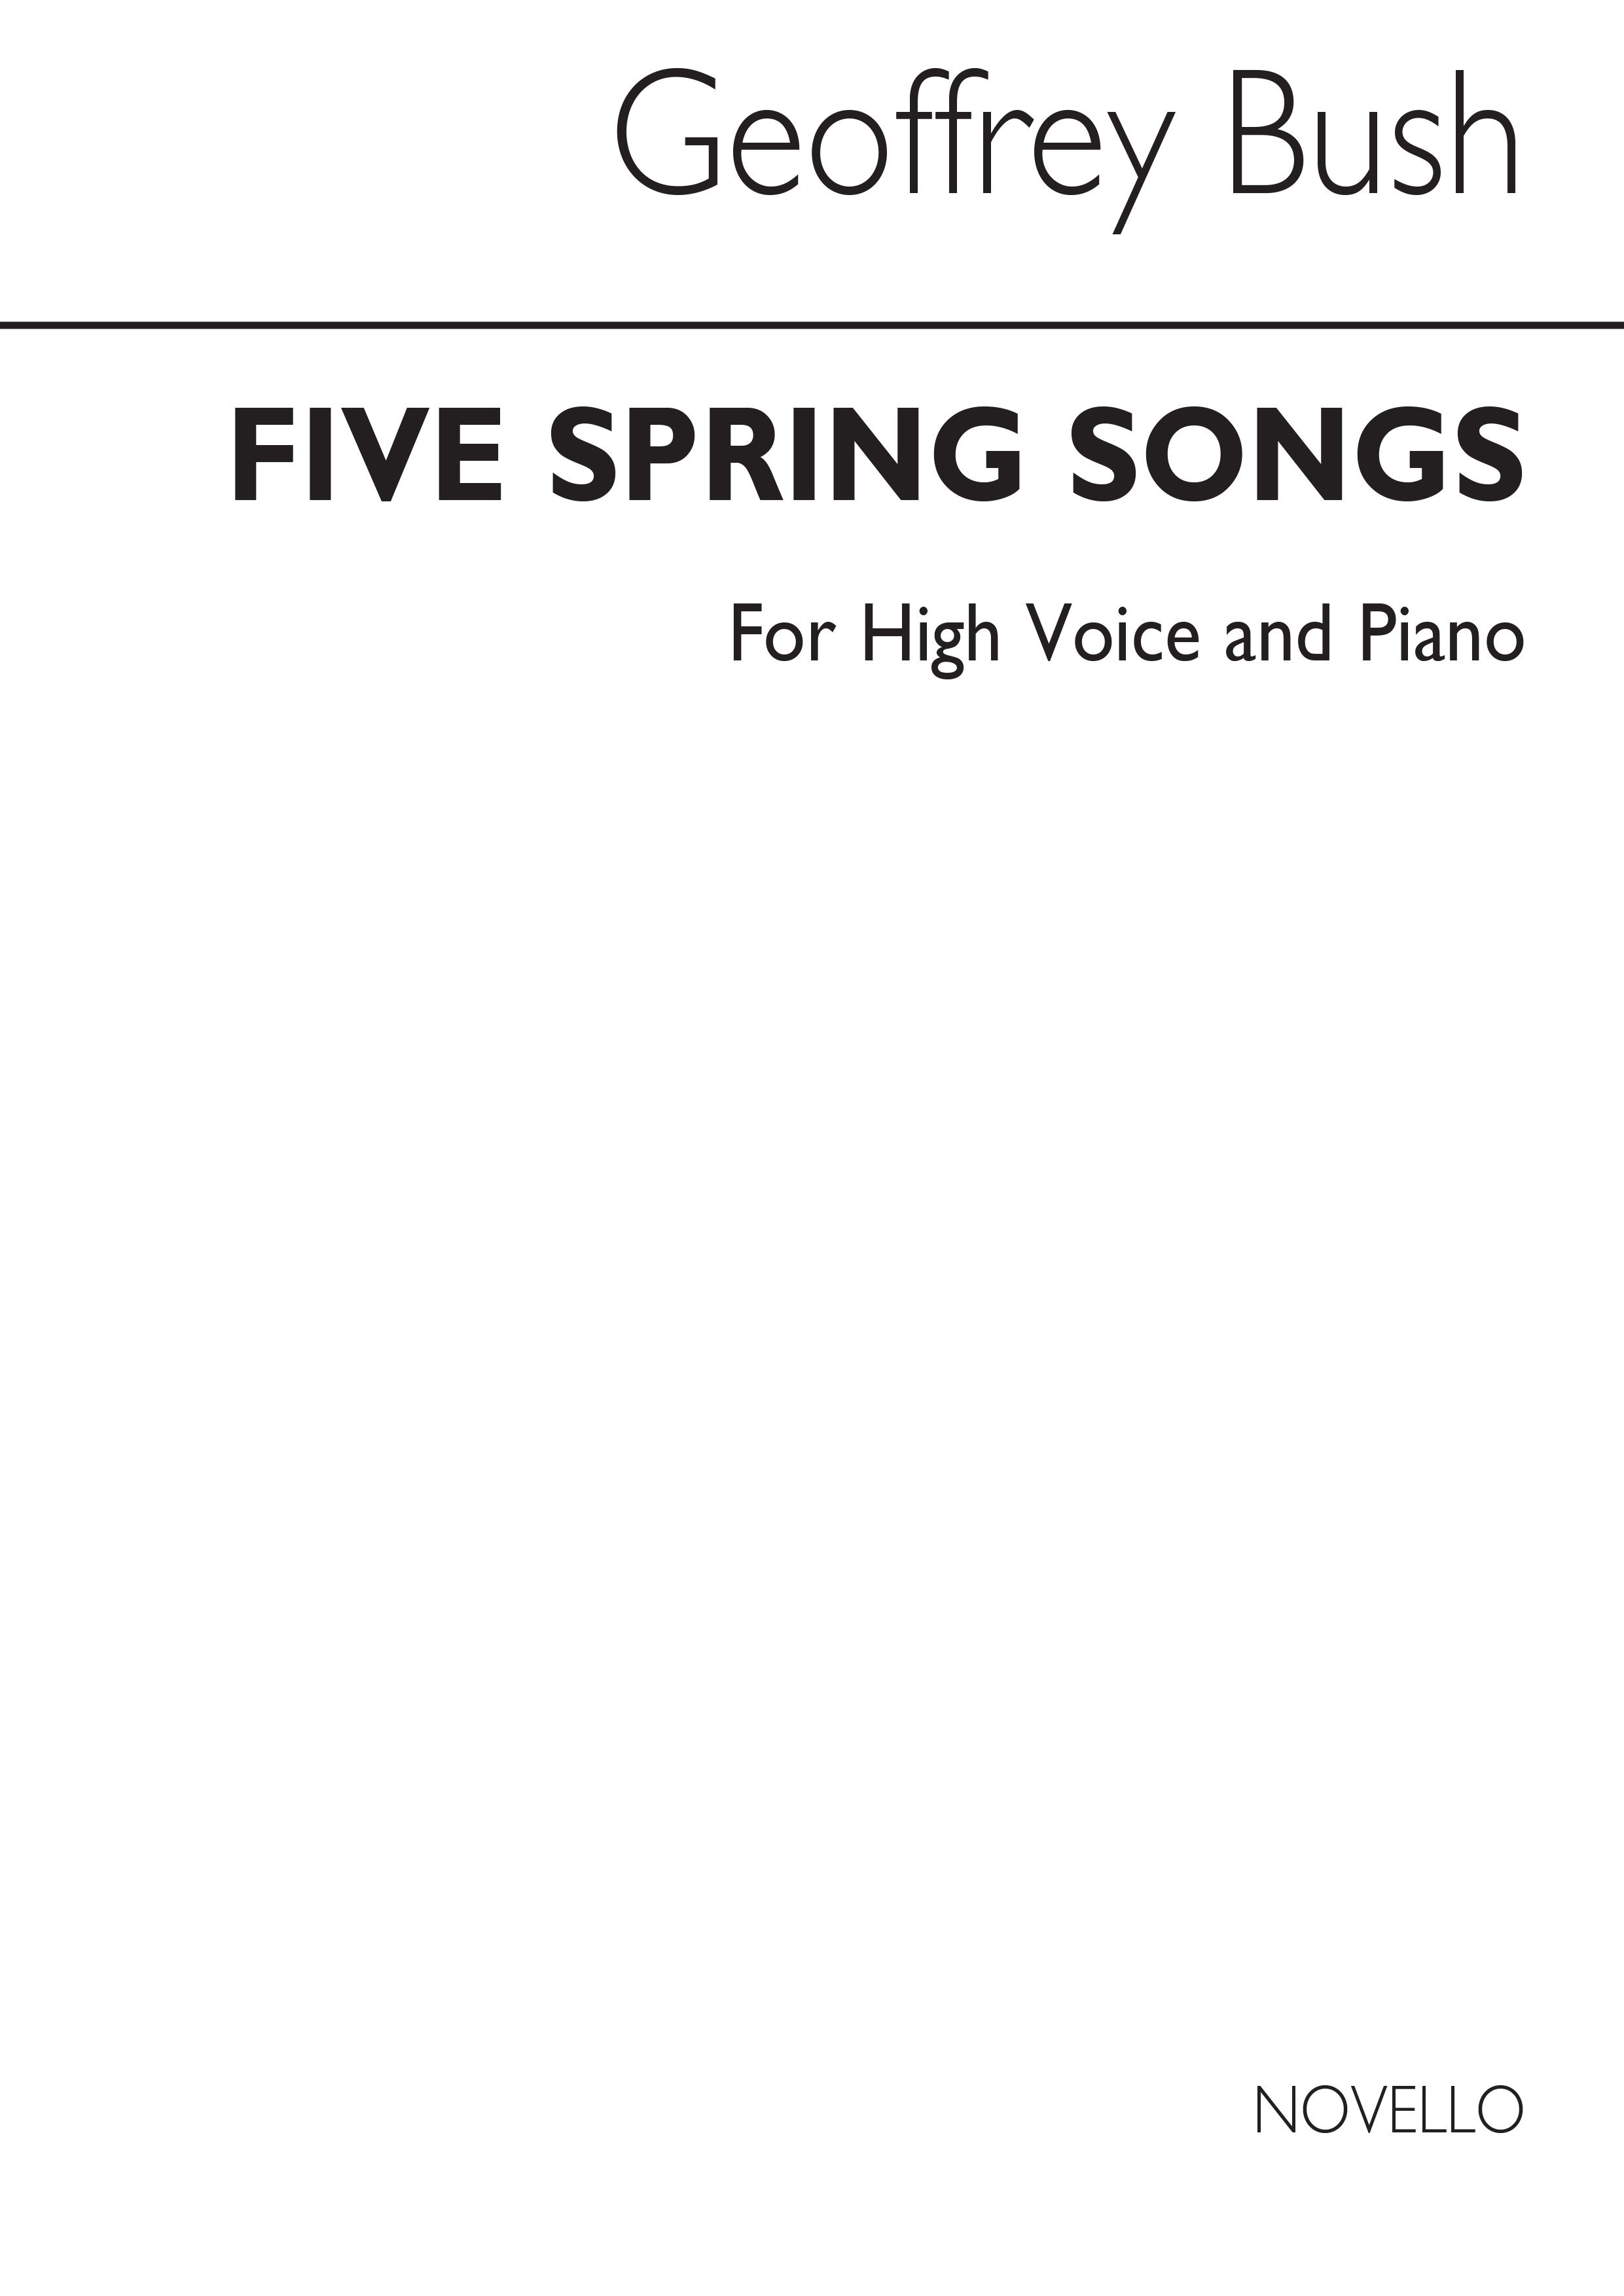 Geoffrey Bush: Five Spring Songs For High Voice And Piano